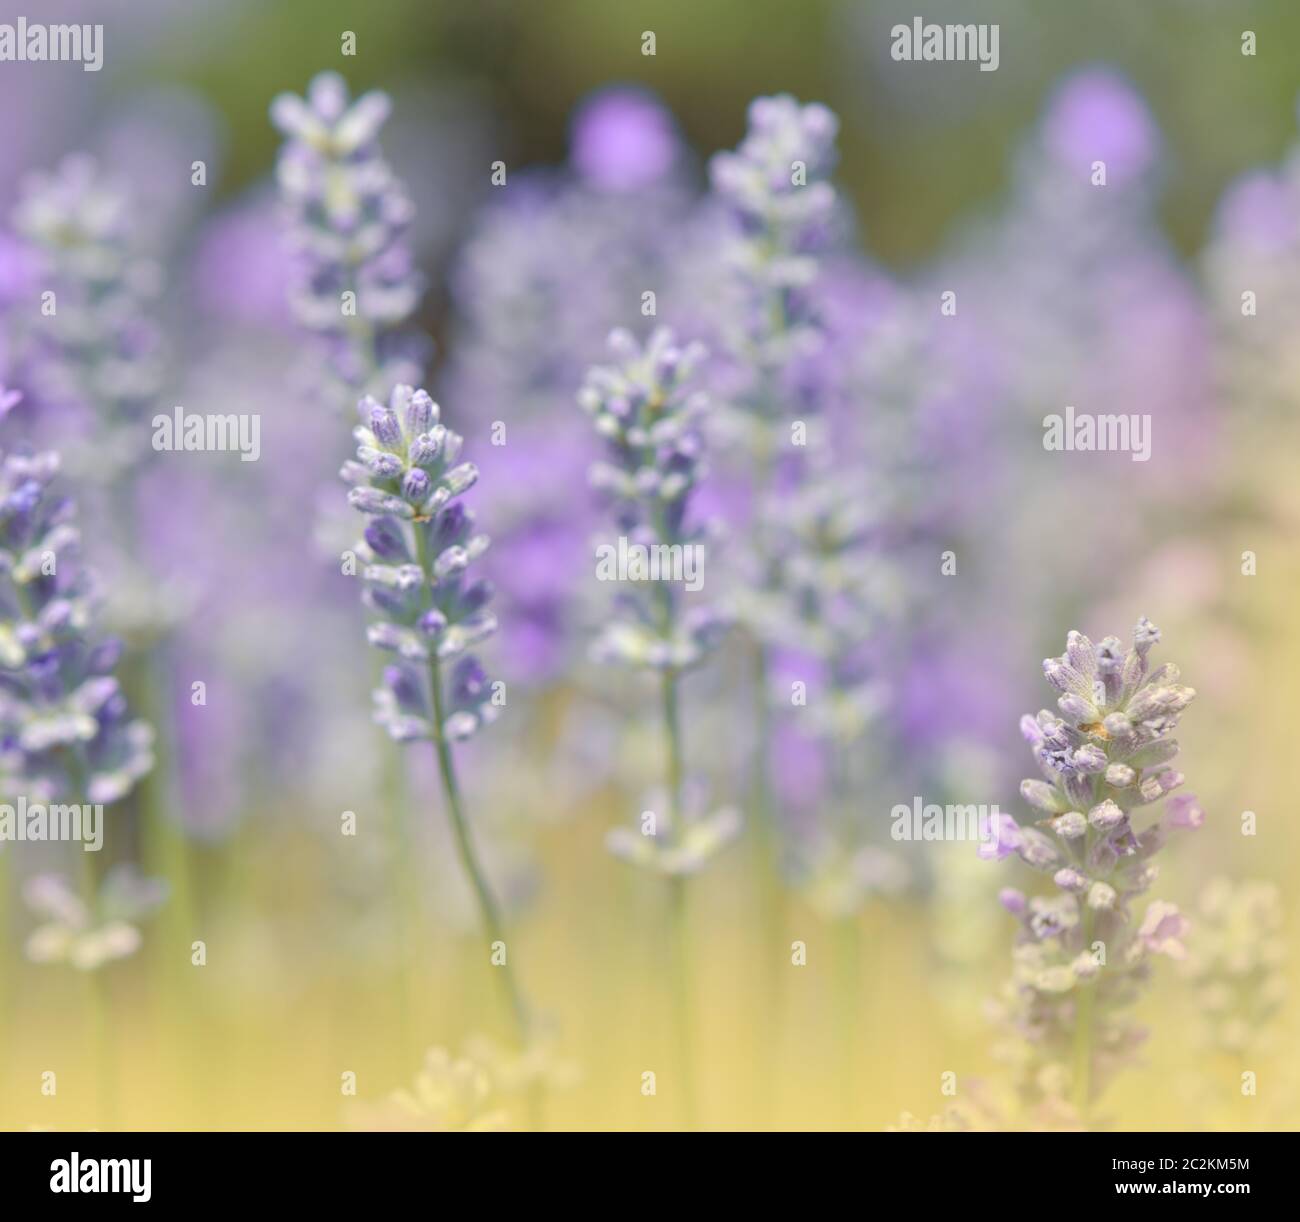 Beautiful Violet Nature Background.Floral Art Design.Soft Focus.Macro Photography.Floral abstract pastel background with copy space.Lavender Field.Summer Floral Background.Artistic Wallpaper.Blooming Violet Fragrant Lavender Flowers.Perfume Ingredient. Stock Photo